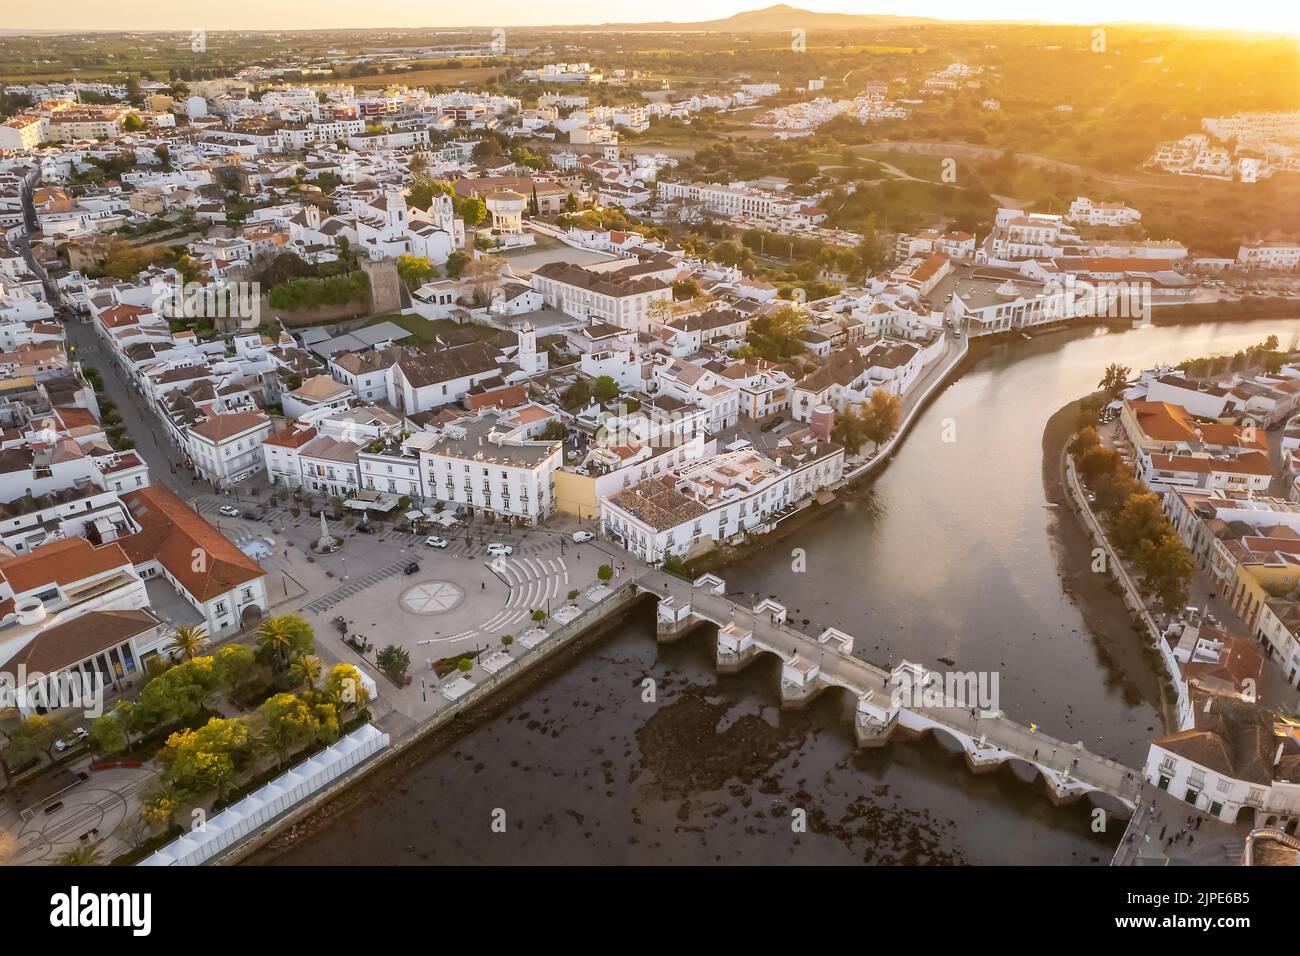 Aerial view of the Tavira old town at sunrise, Algarve region, Portugal Stock Photo